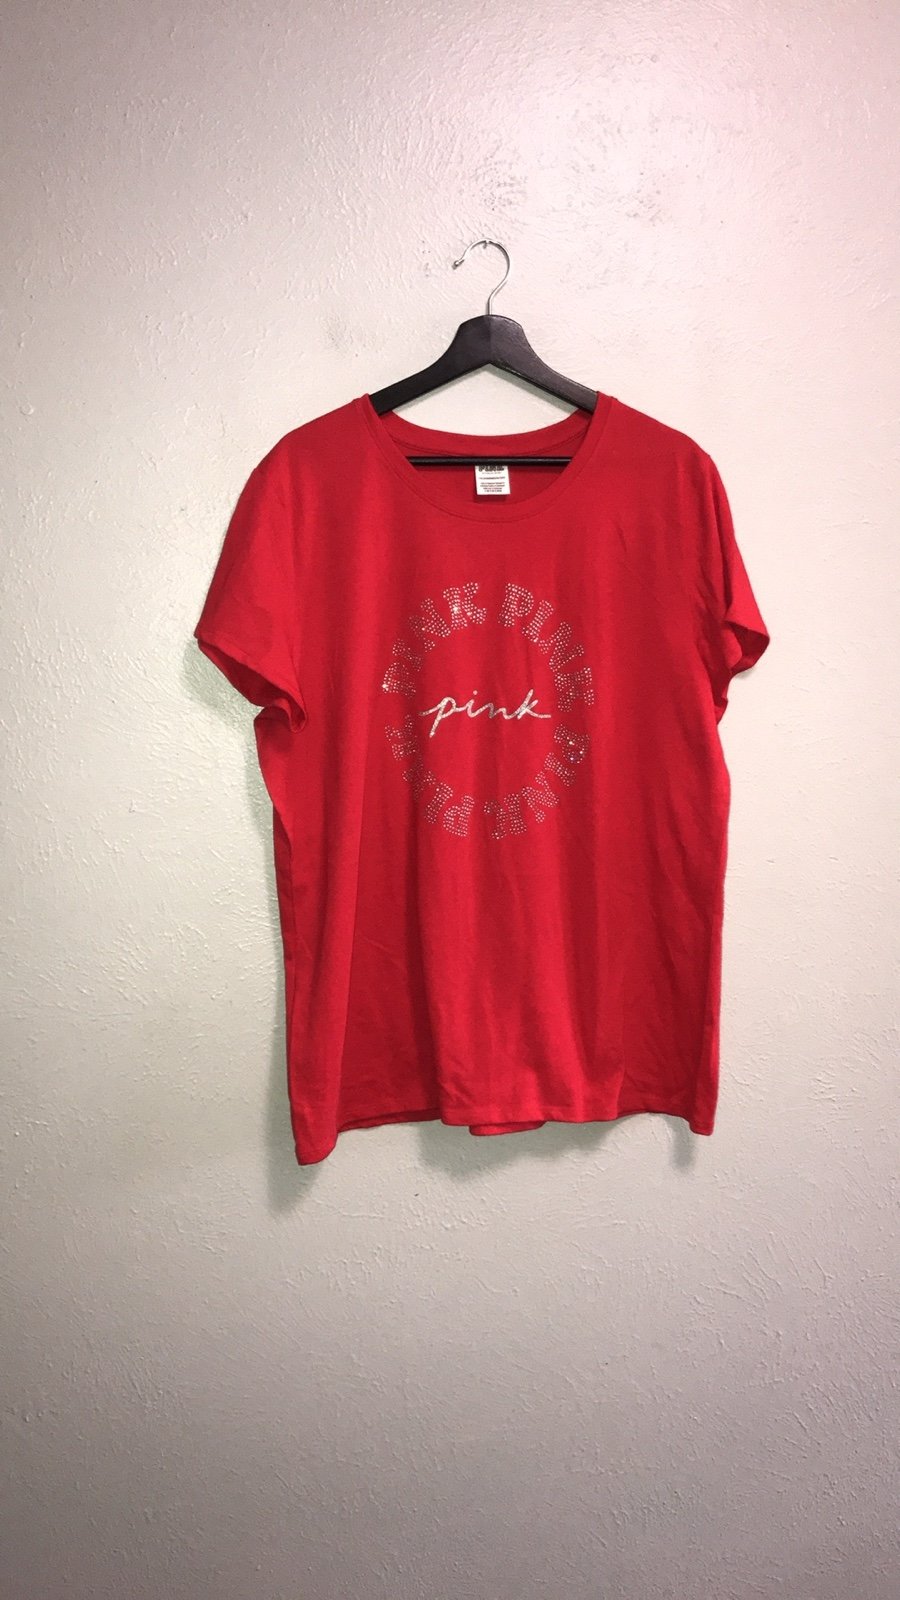 the Lowest price Vs shirt nwt JN2GzY08g Online Exclusiv